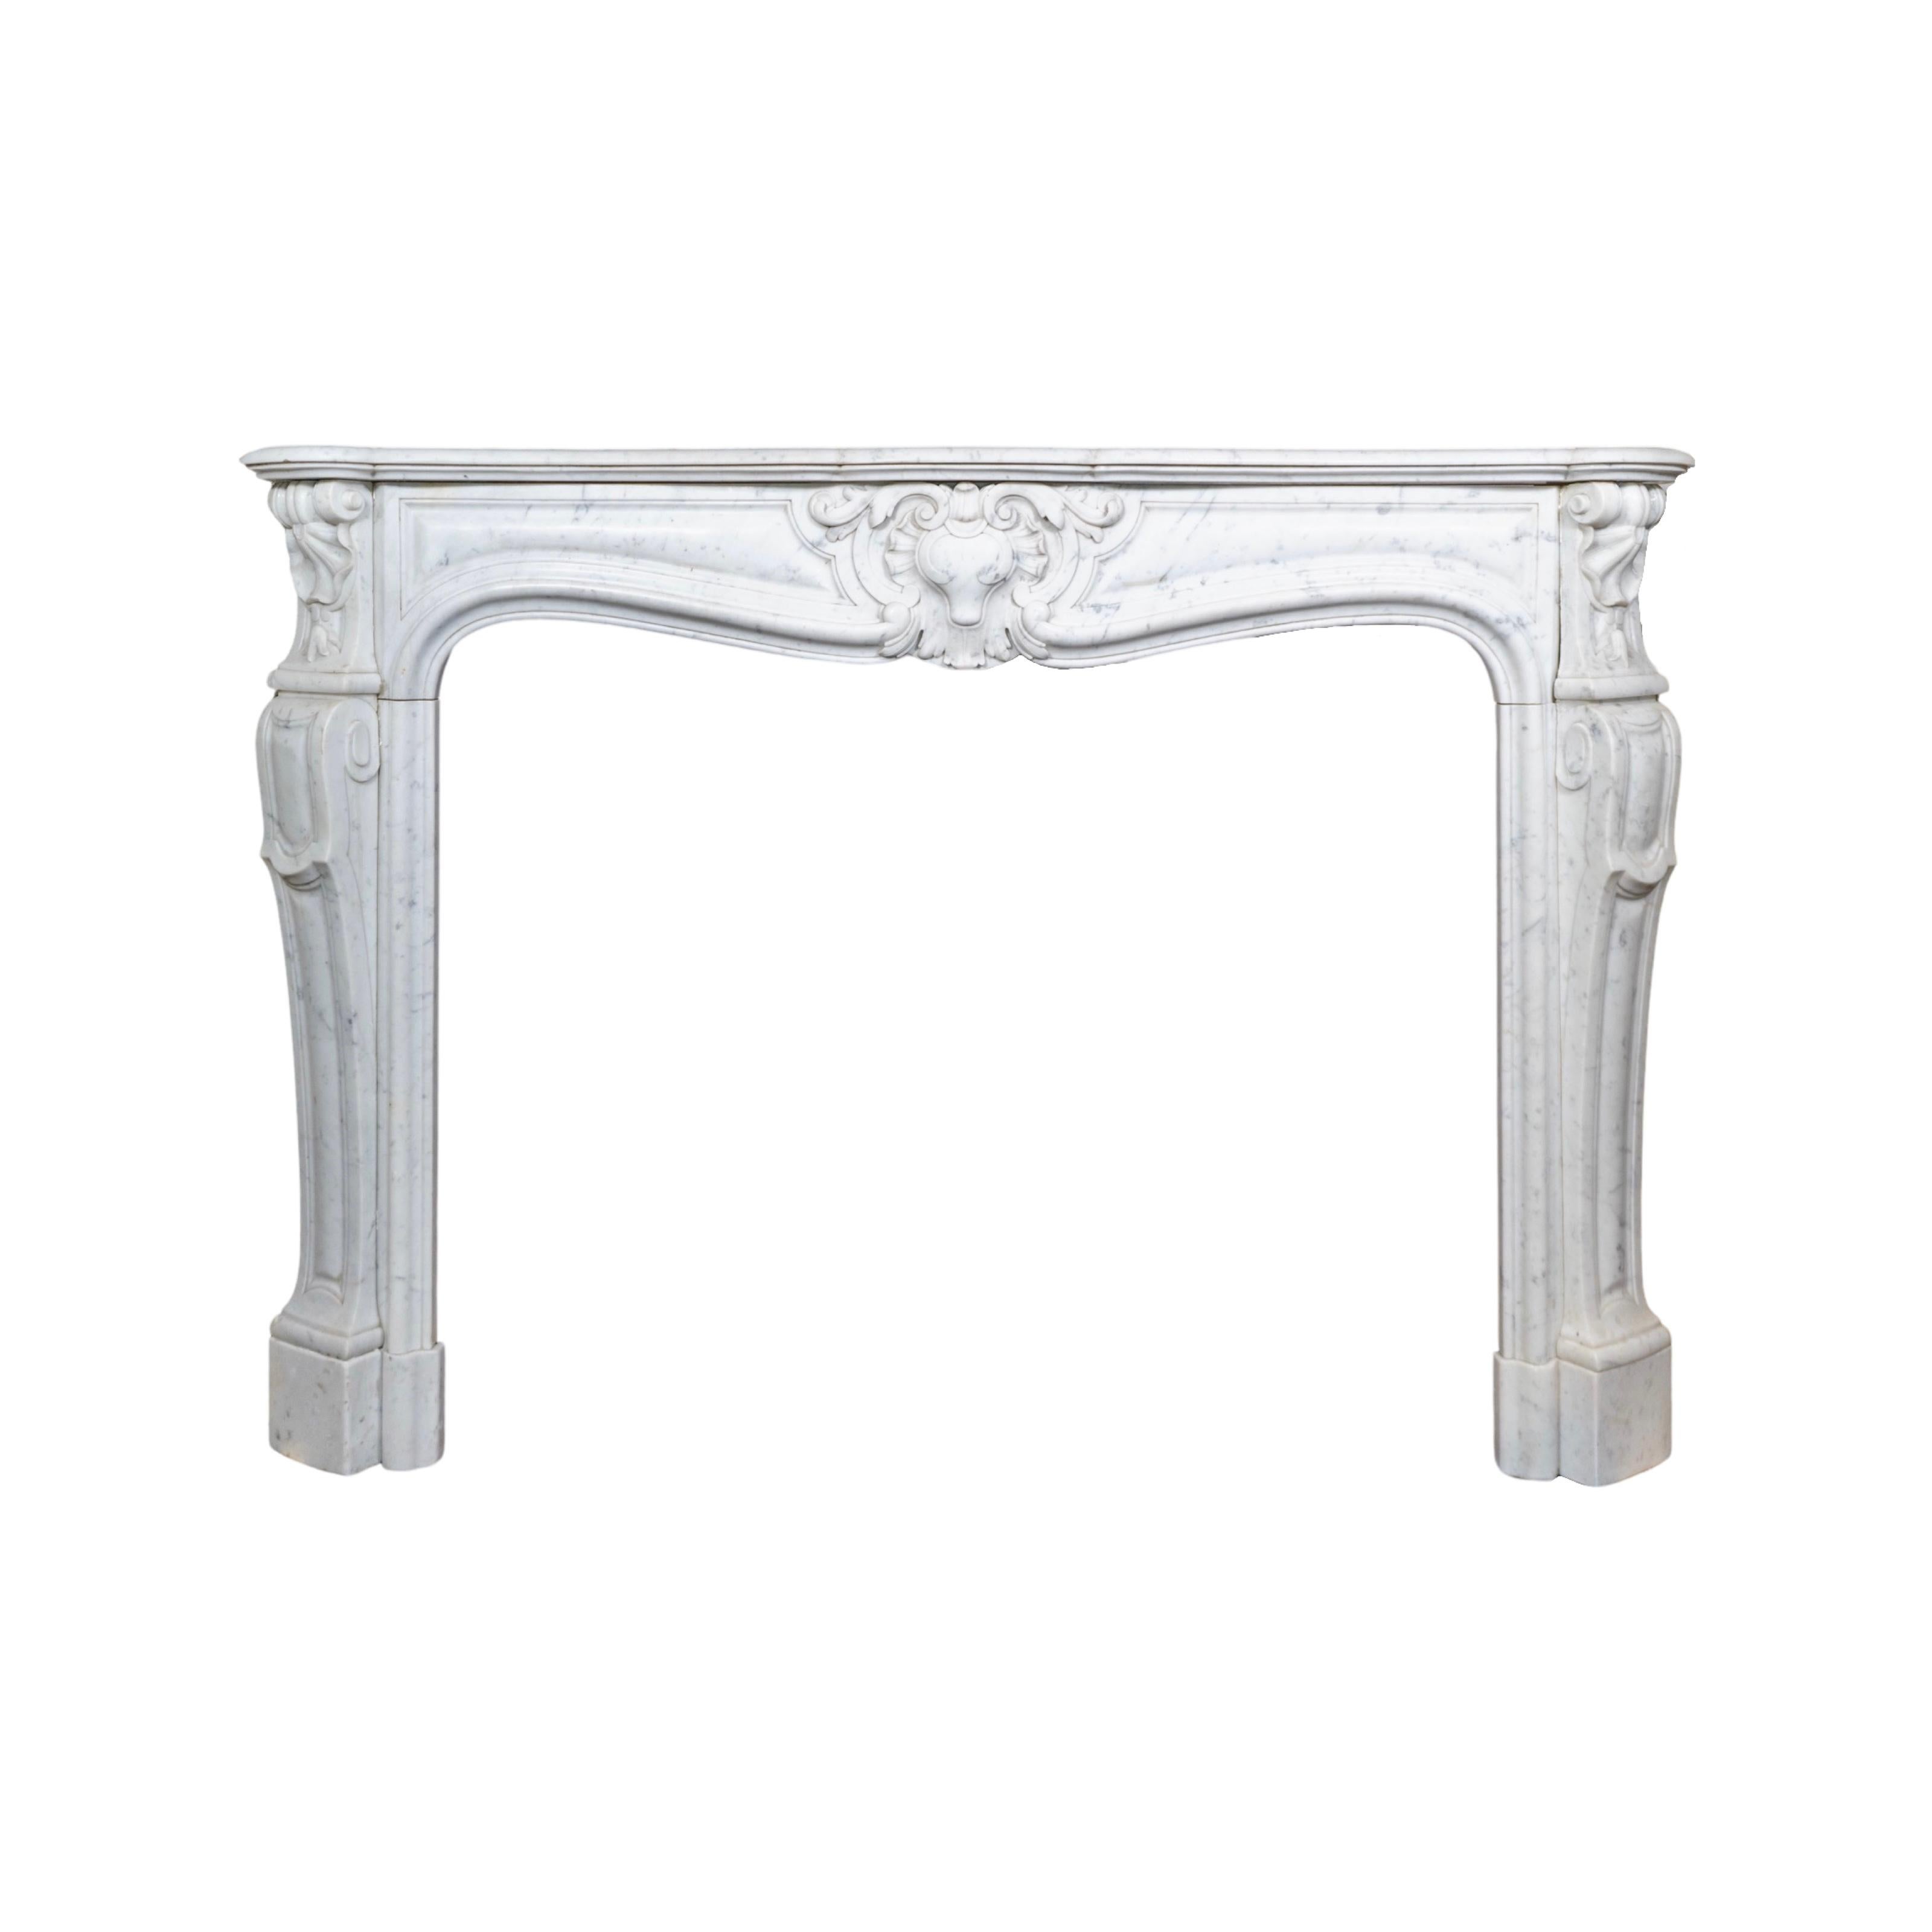 This French White Carrara Marble Mantel, made in the 1890s from high-quality Carrara marble from France, features intricate style carvings and built-in air vents on both sides of the legs. The perfect addition to any fireplace, this mantel offers